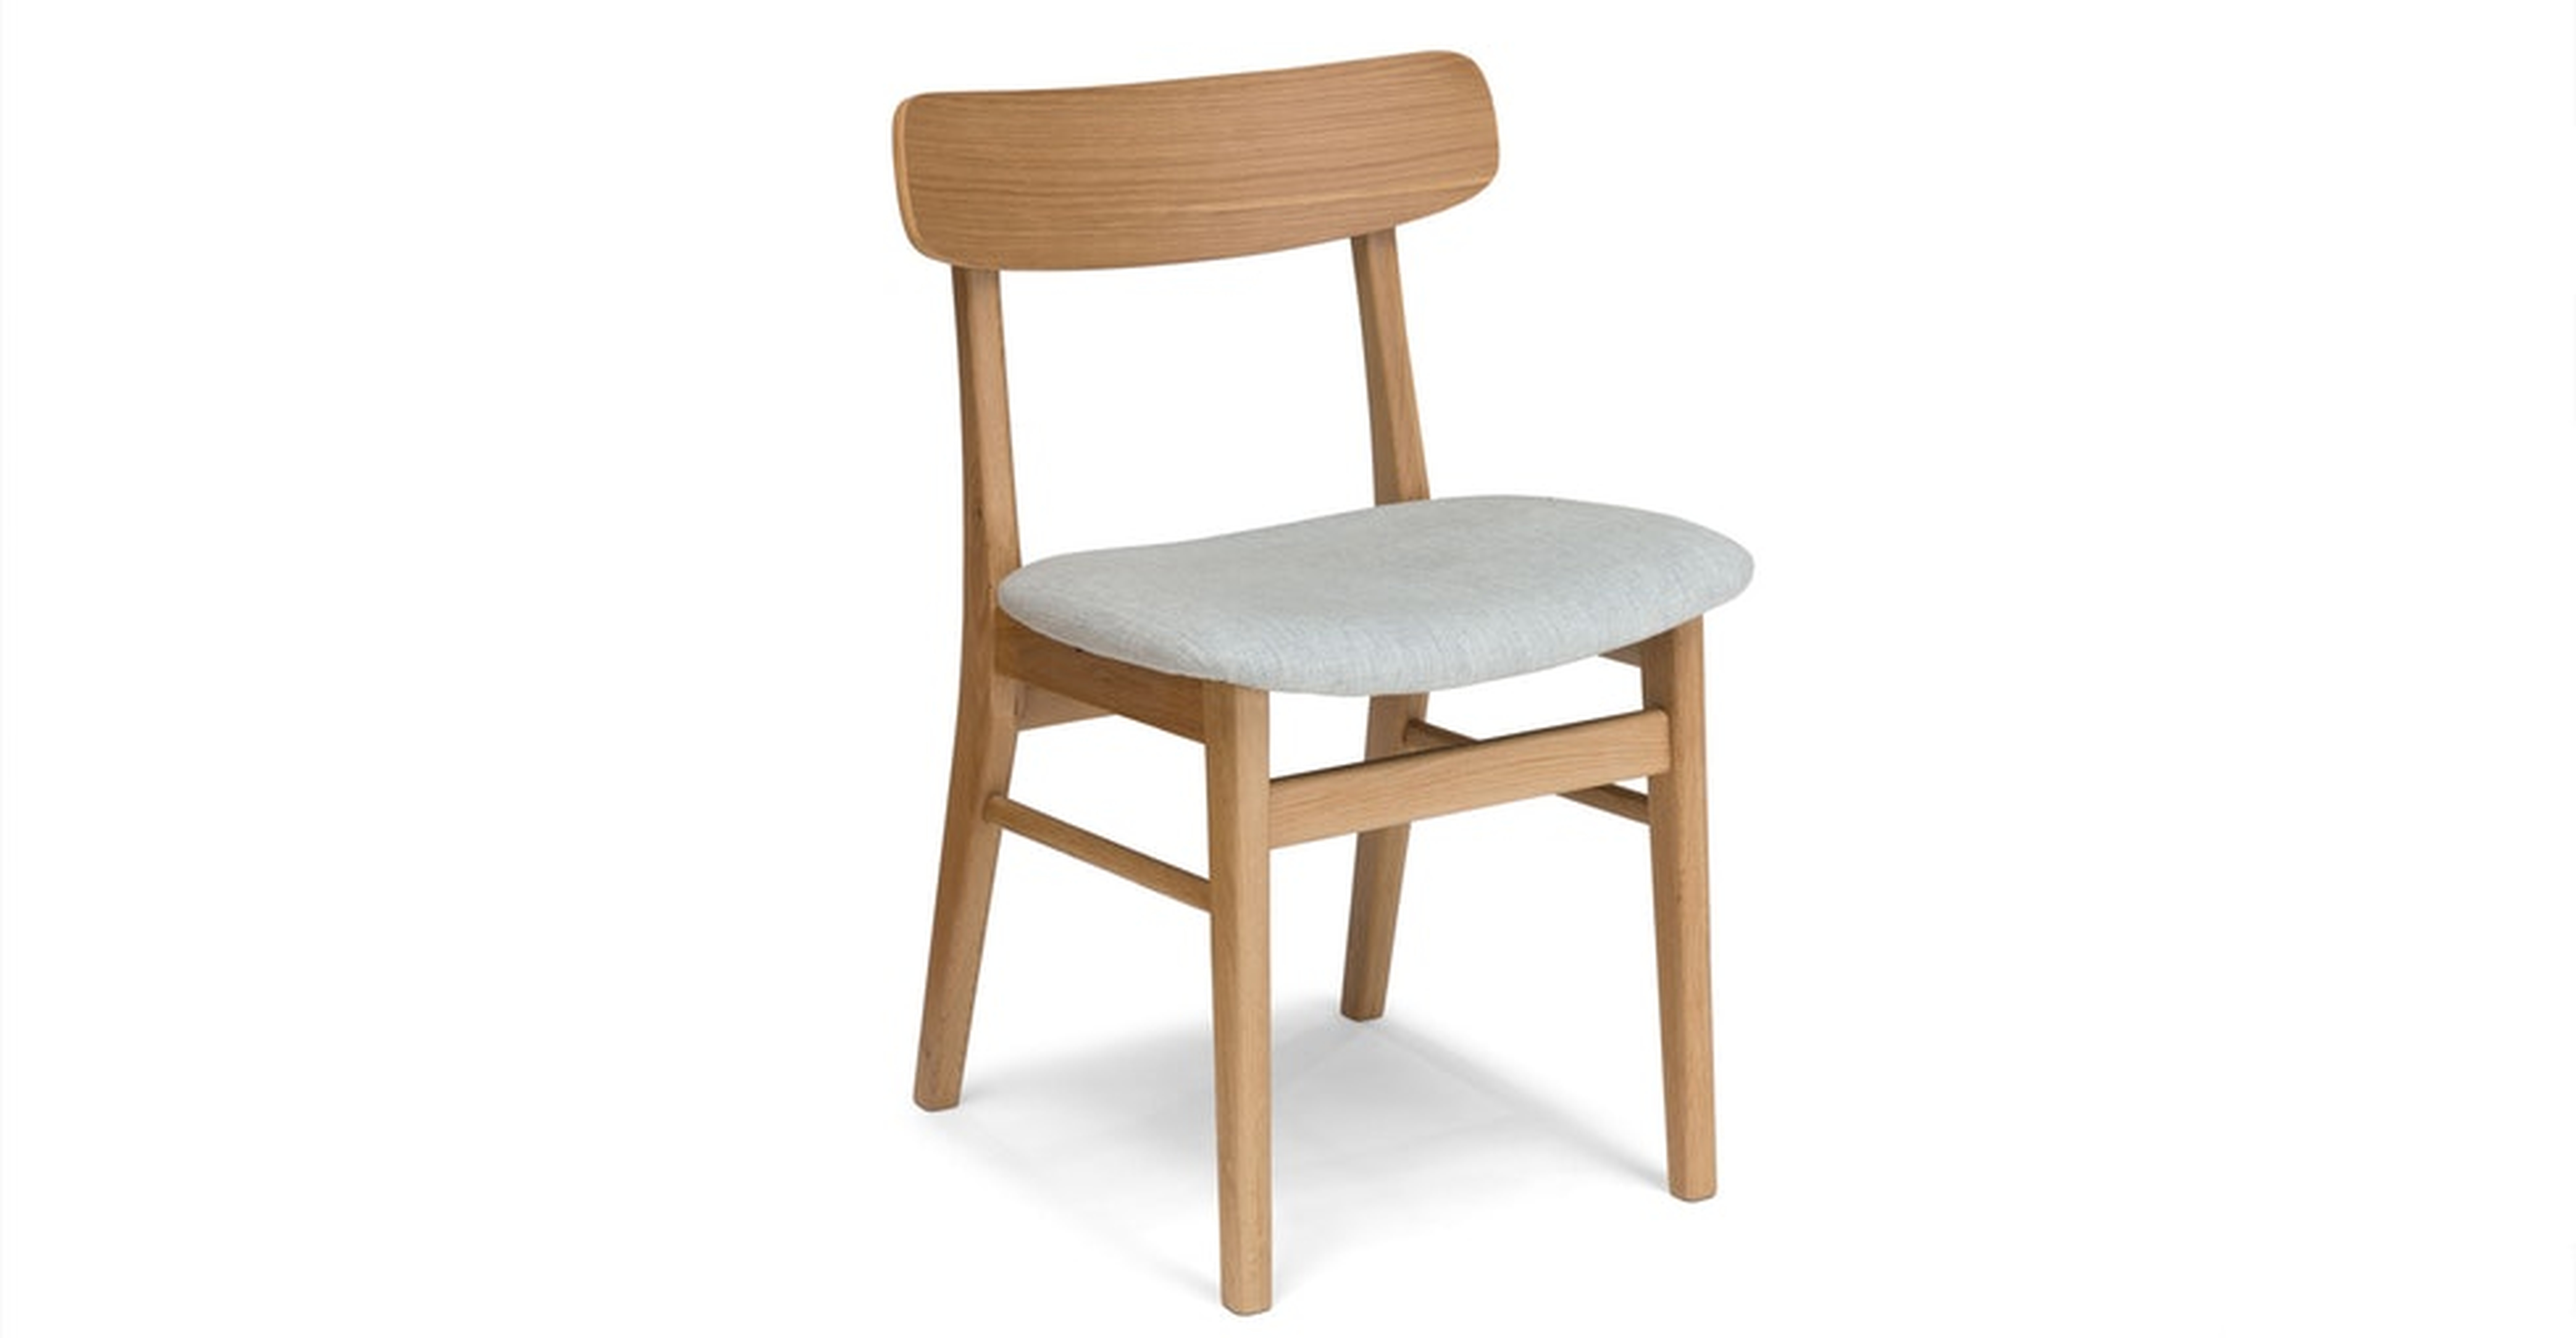 Ecole Mist Gray Oak Dining Chair - Article